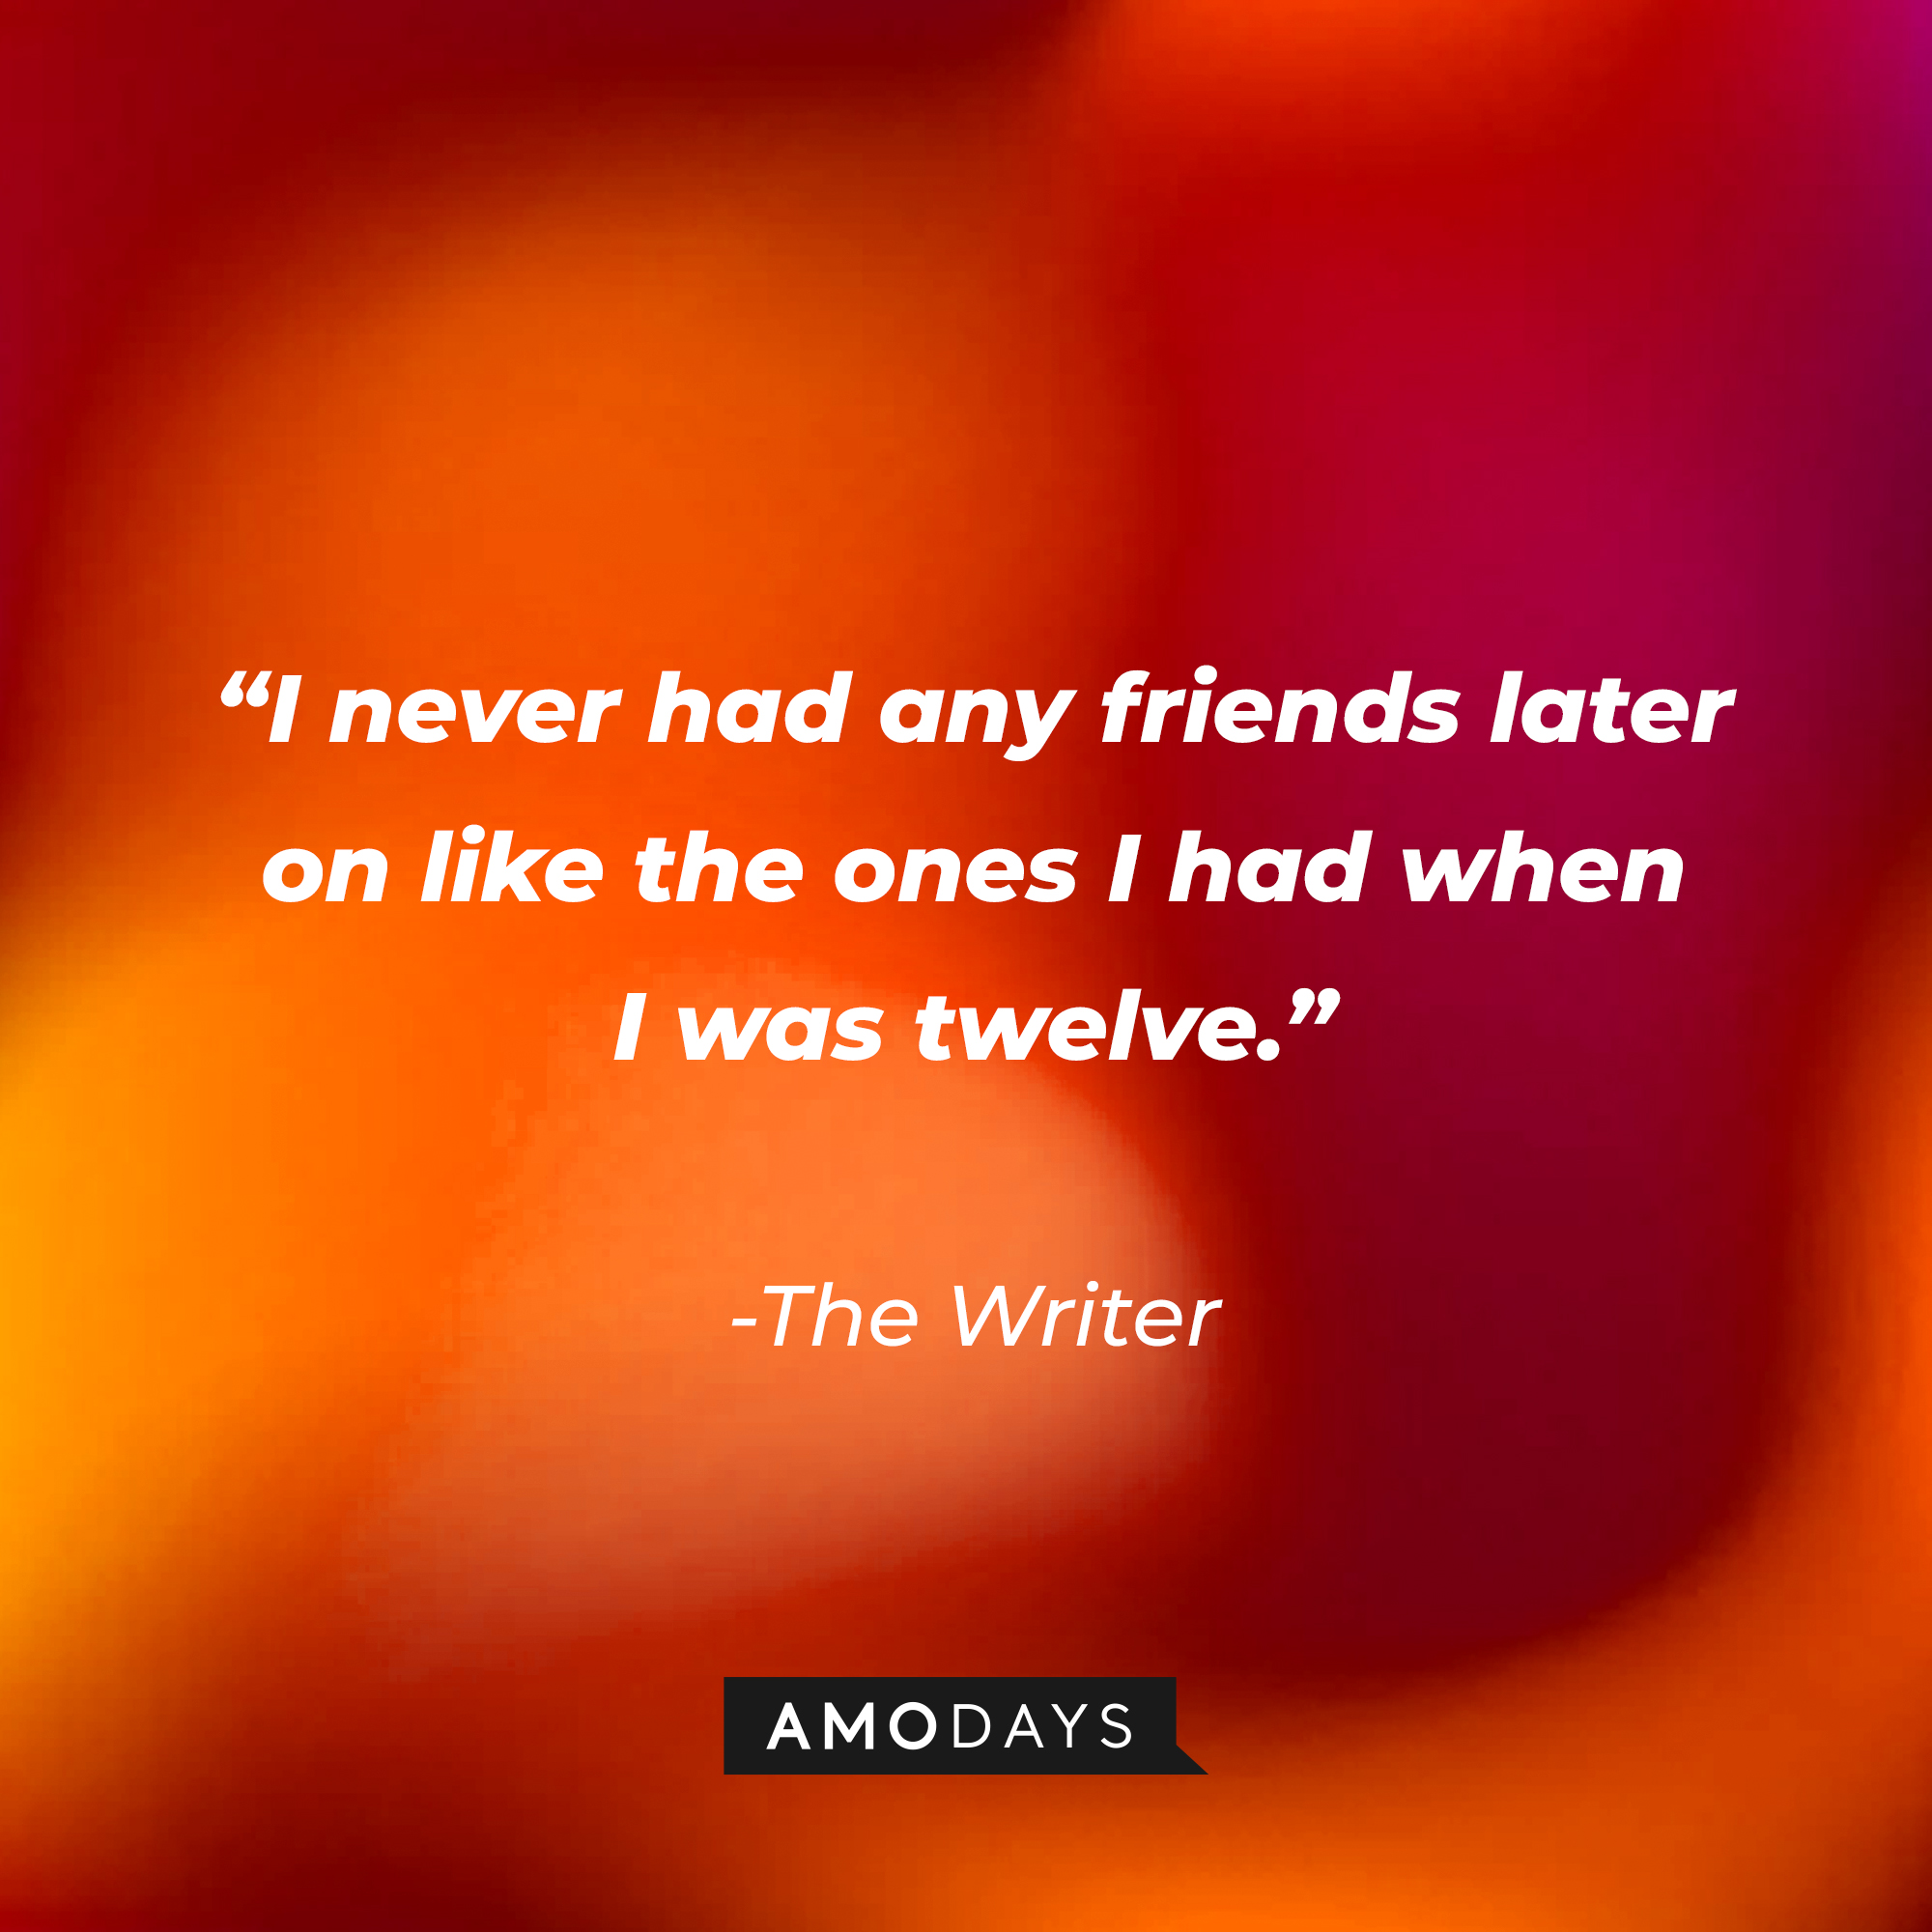 The Writer’s quote:  “I’d never had any friends later on like the ones I had when I was twelve."  | Source: AmoDays